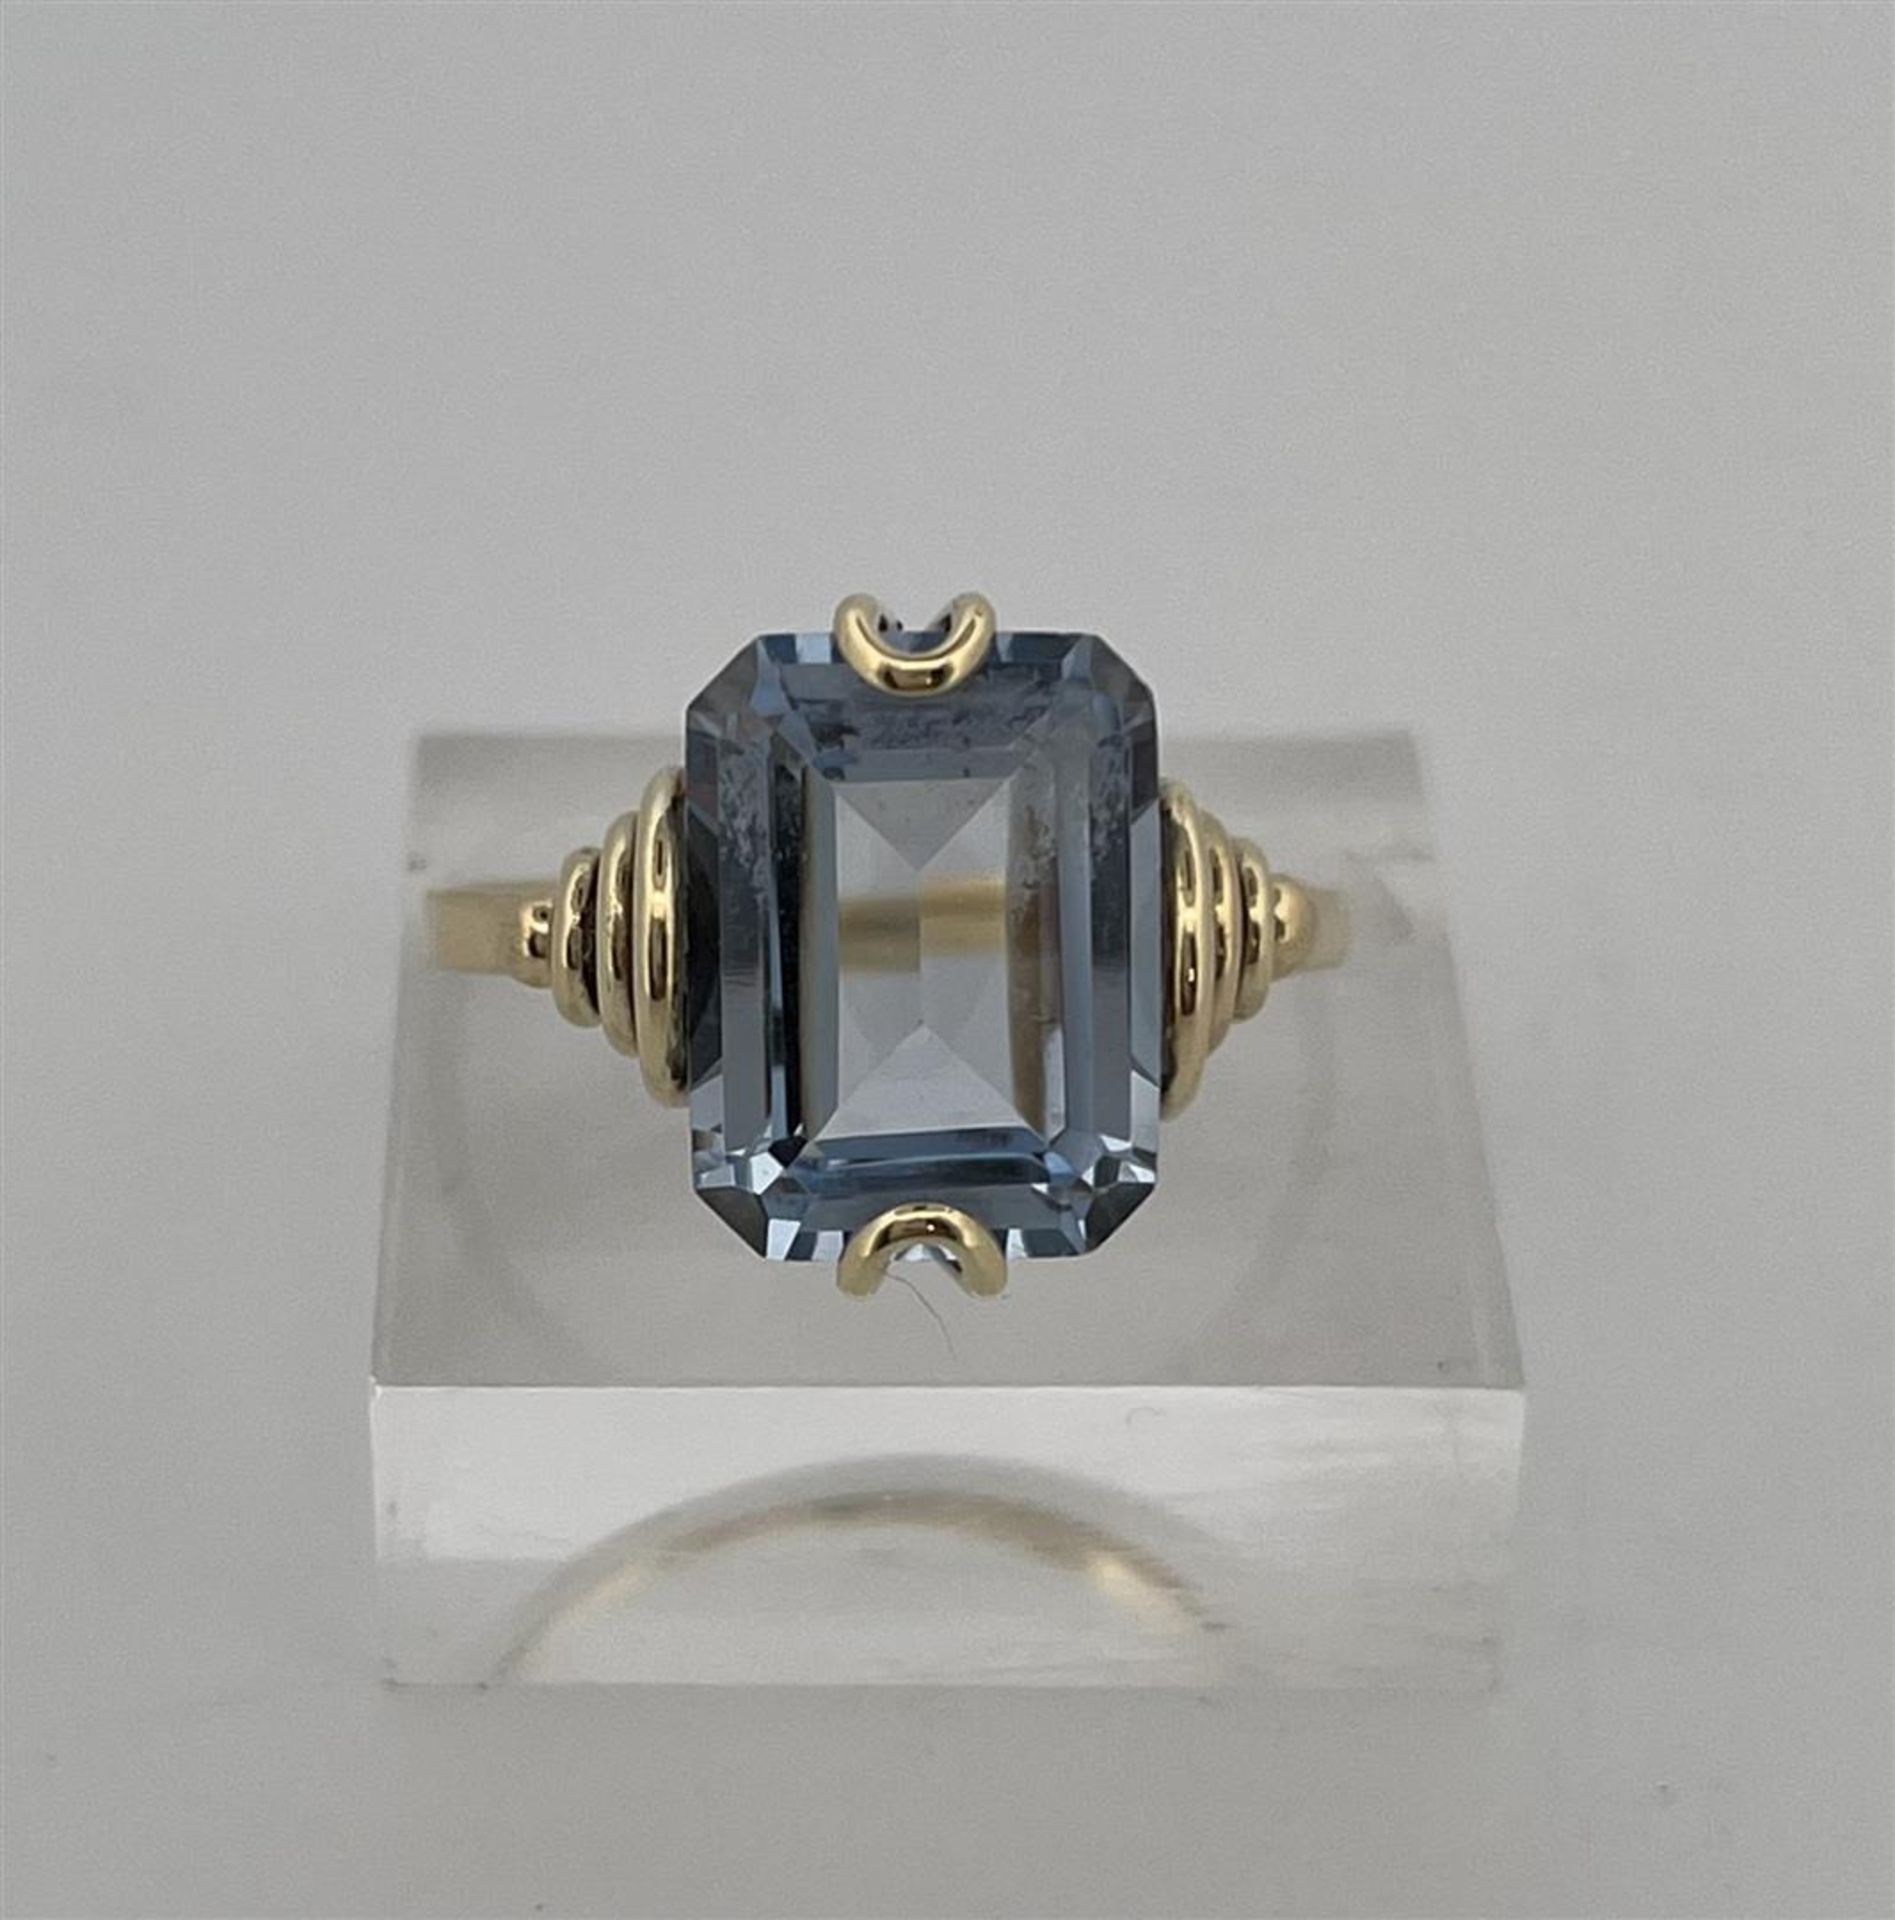 14kt yellow gold ring set with aquamarine.
The aquamarine isemerald cut measures approx. 11.8 x 8.9  - Image 5 of 11